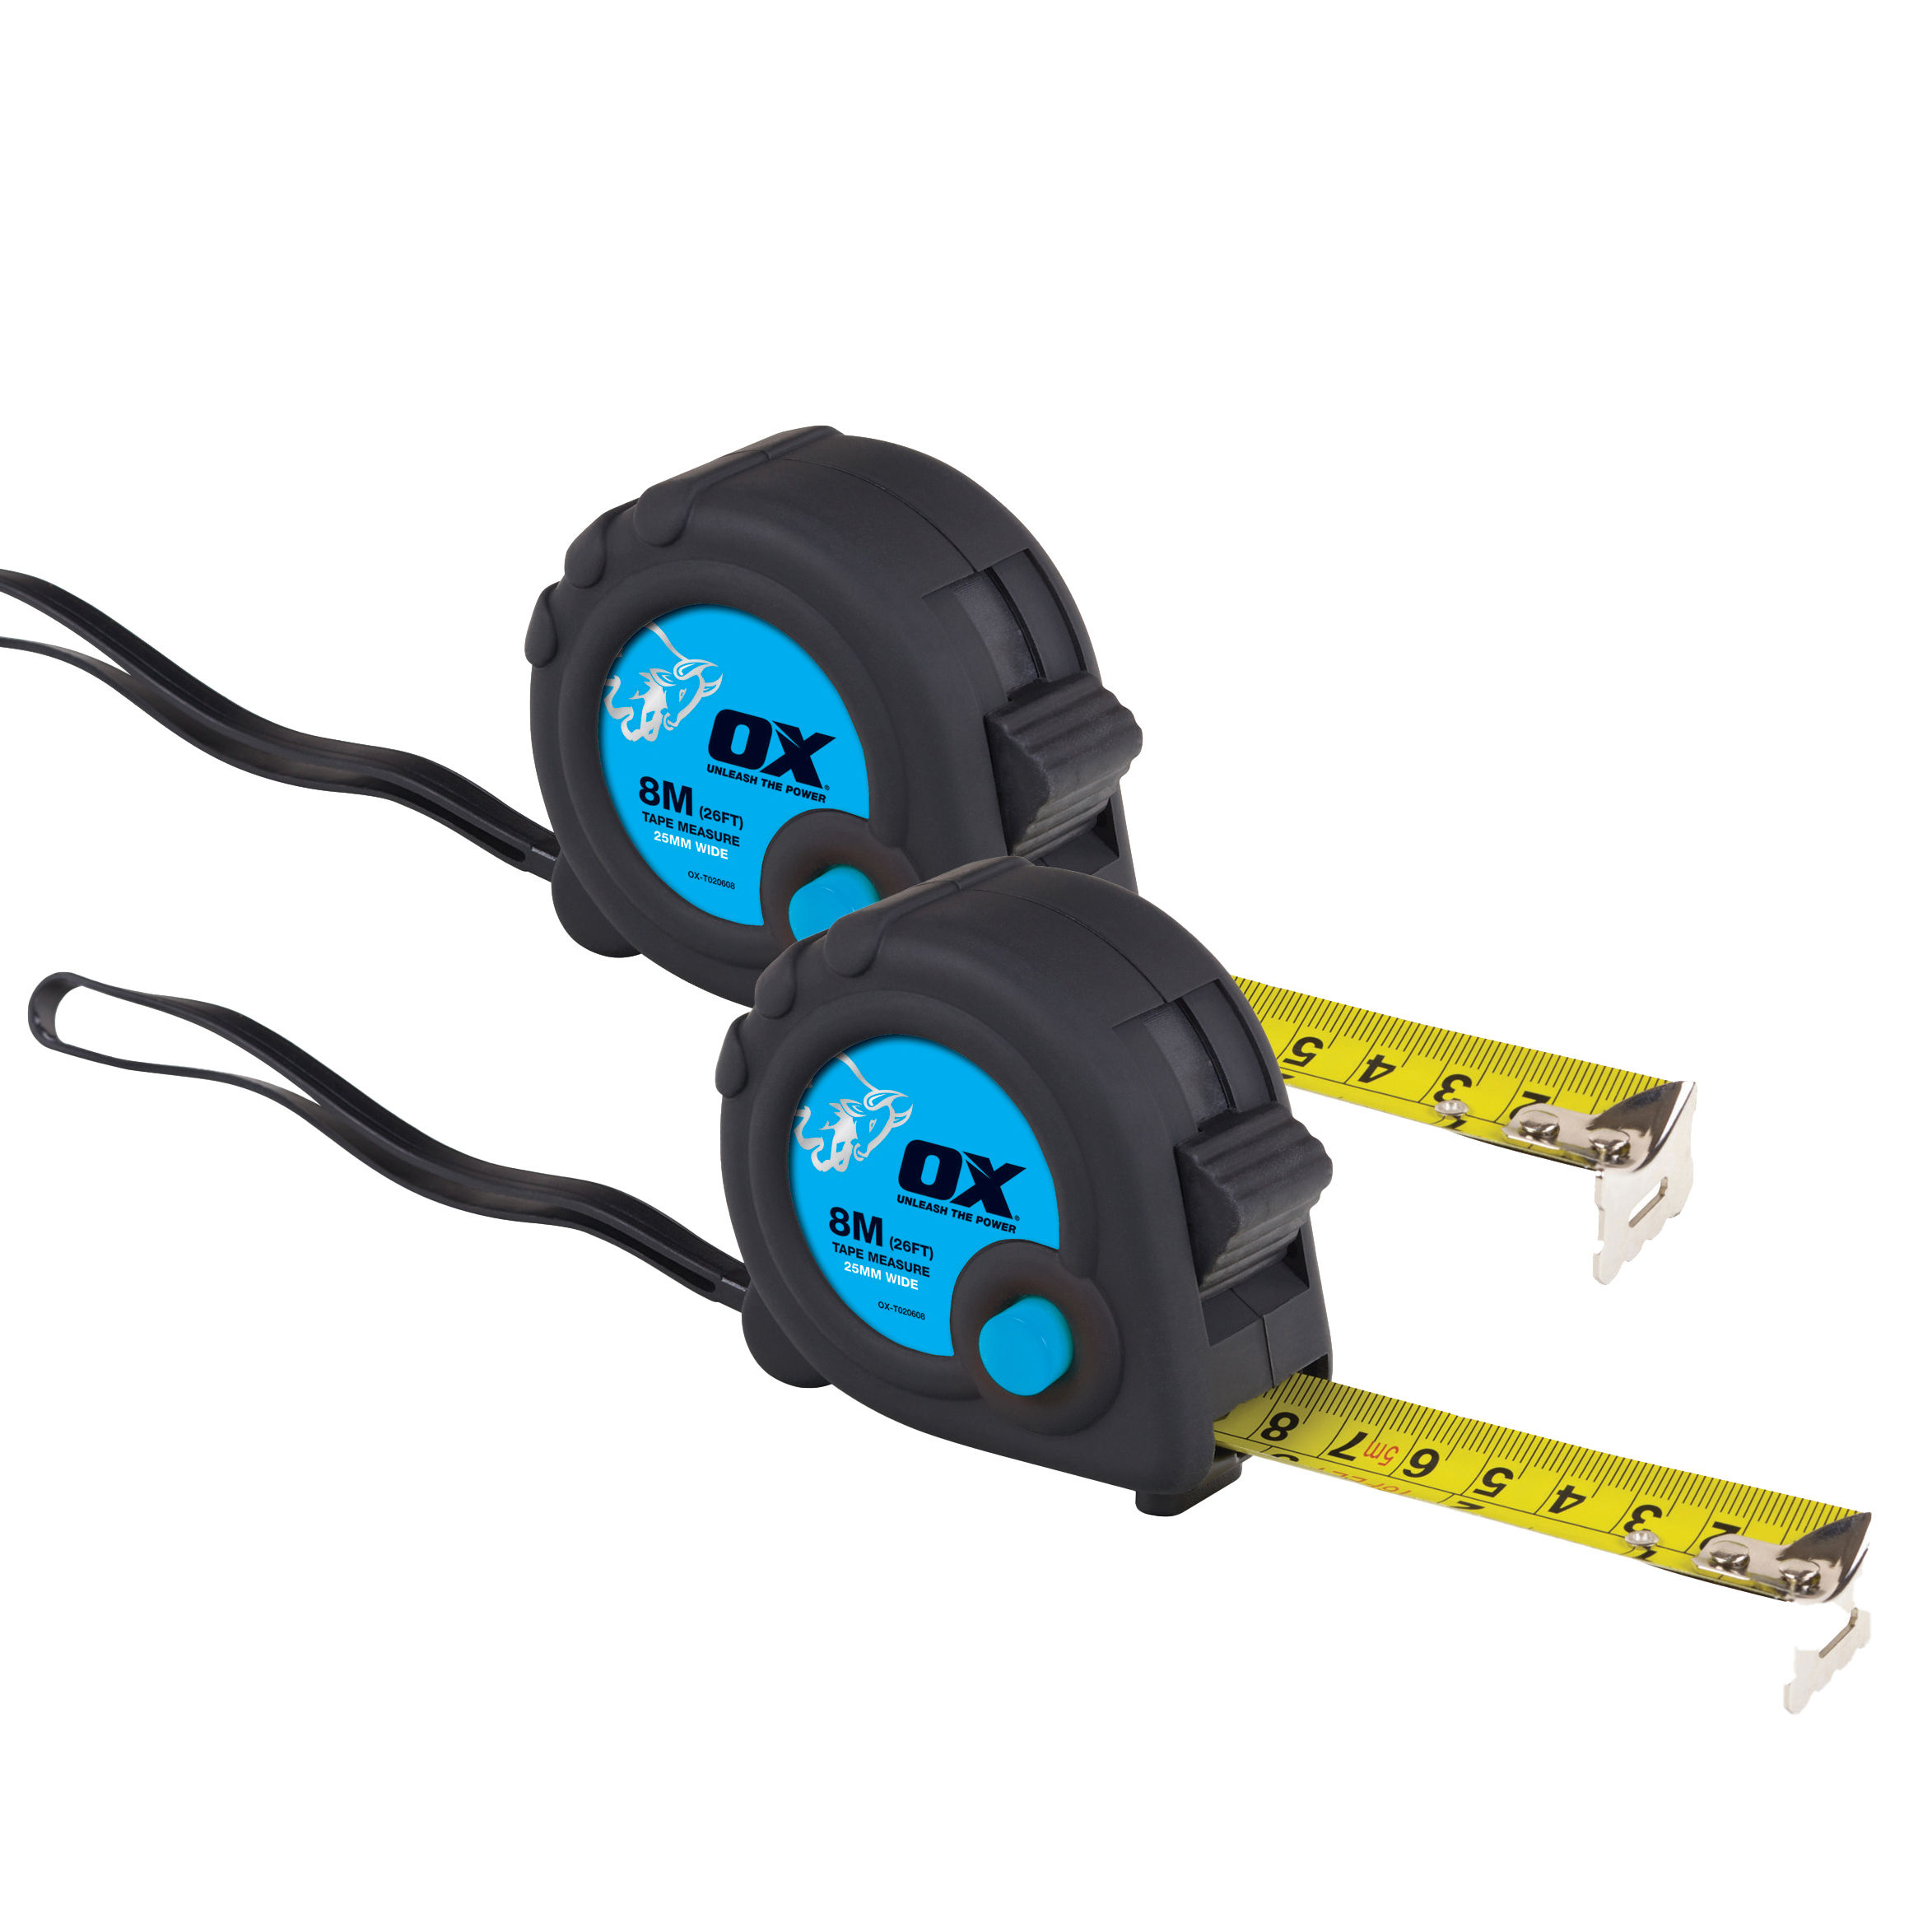 OX Trade Tape Measures (Twin Pack) 8m/25mm - OX-T505088